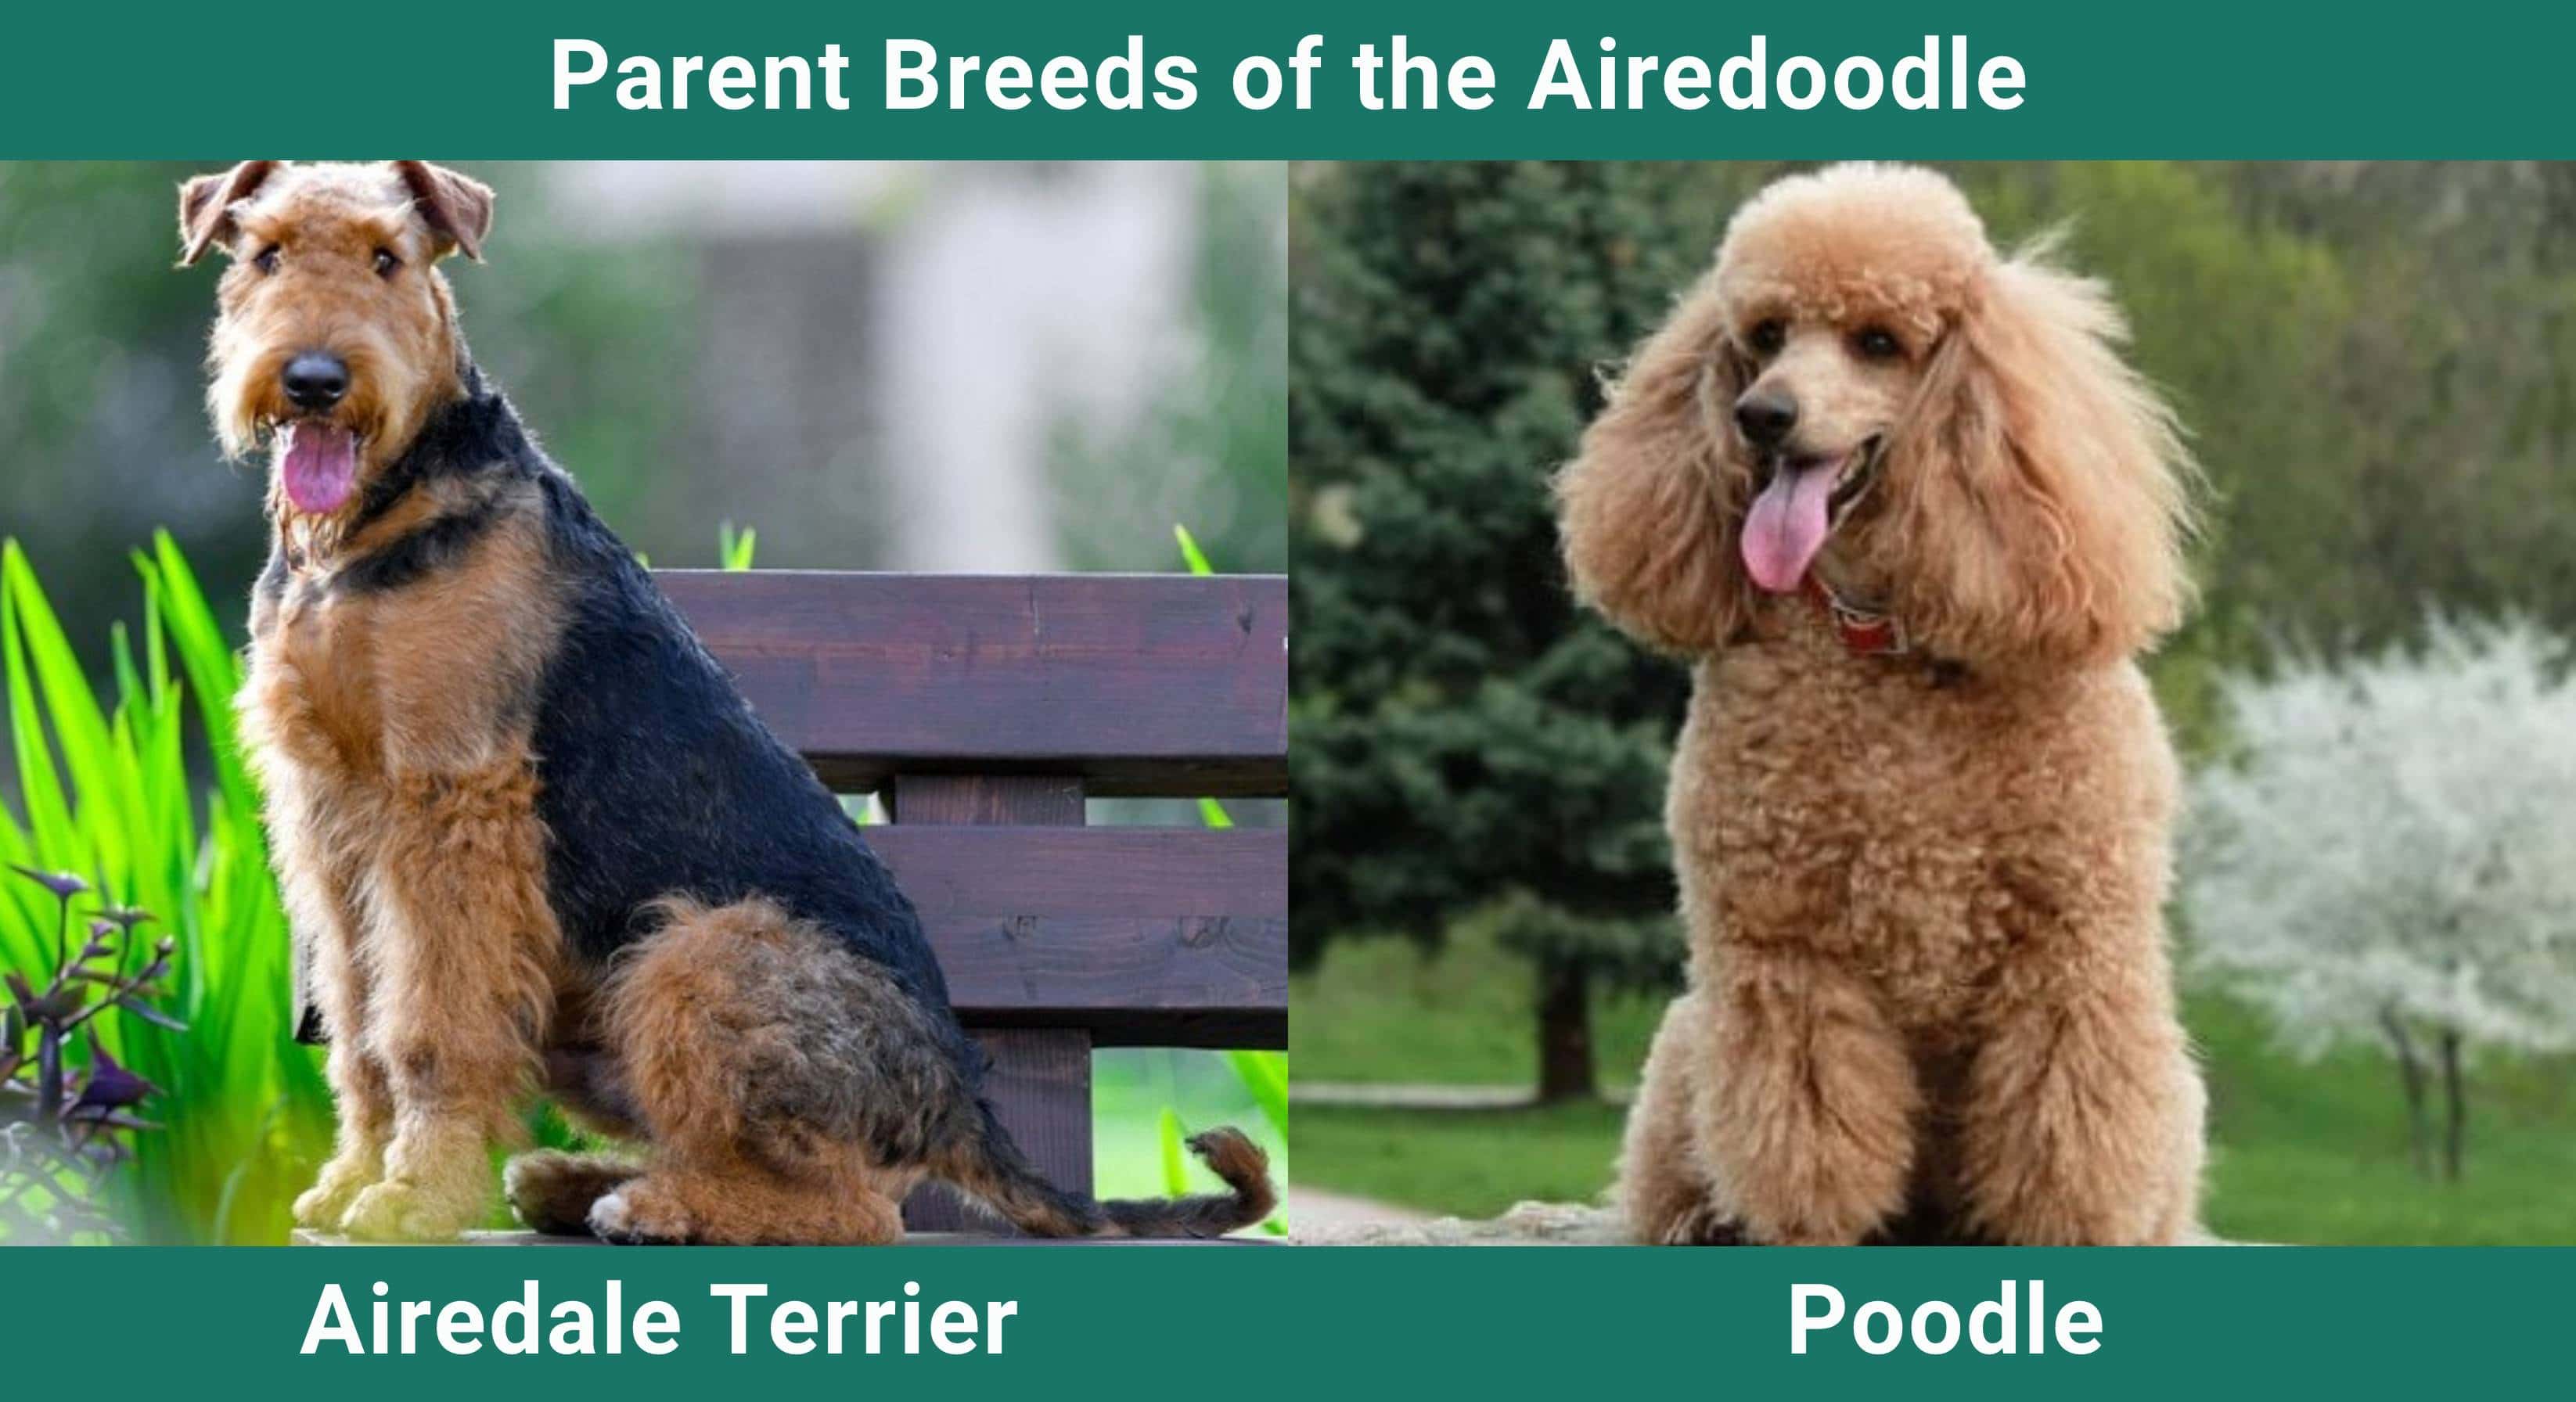 Parent_breeds_Airedoodle